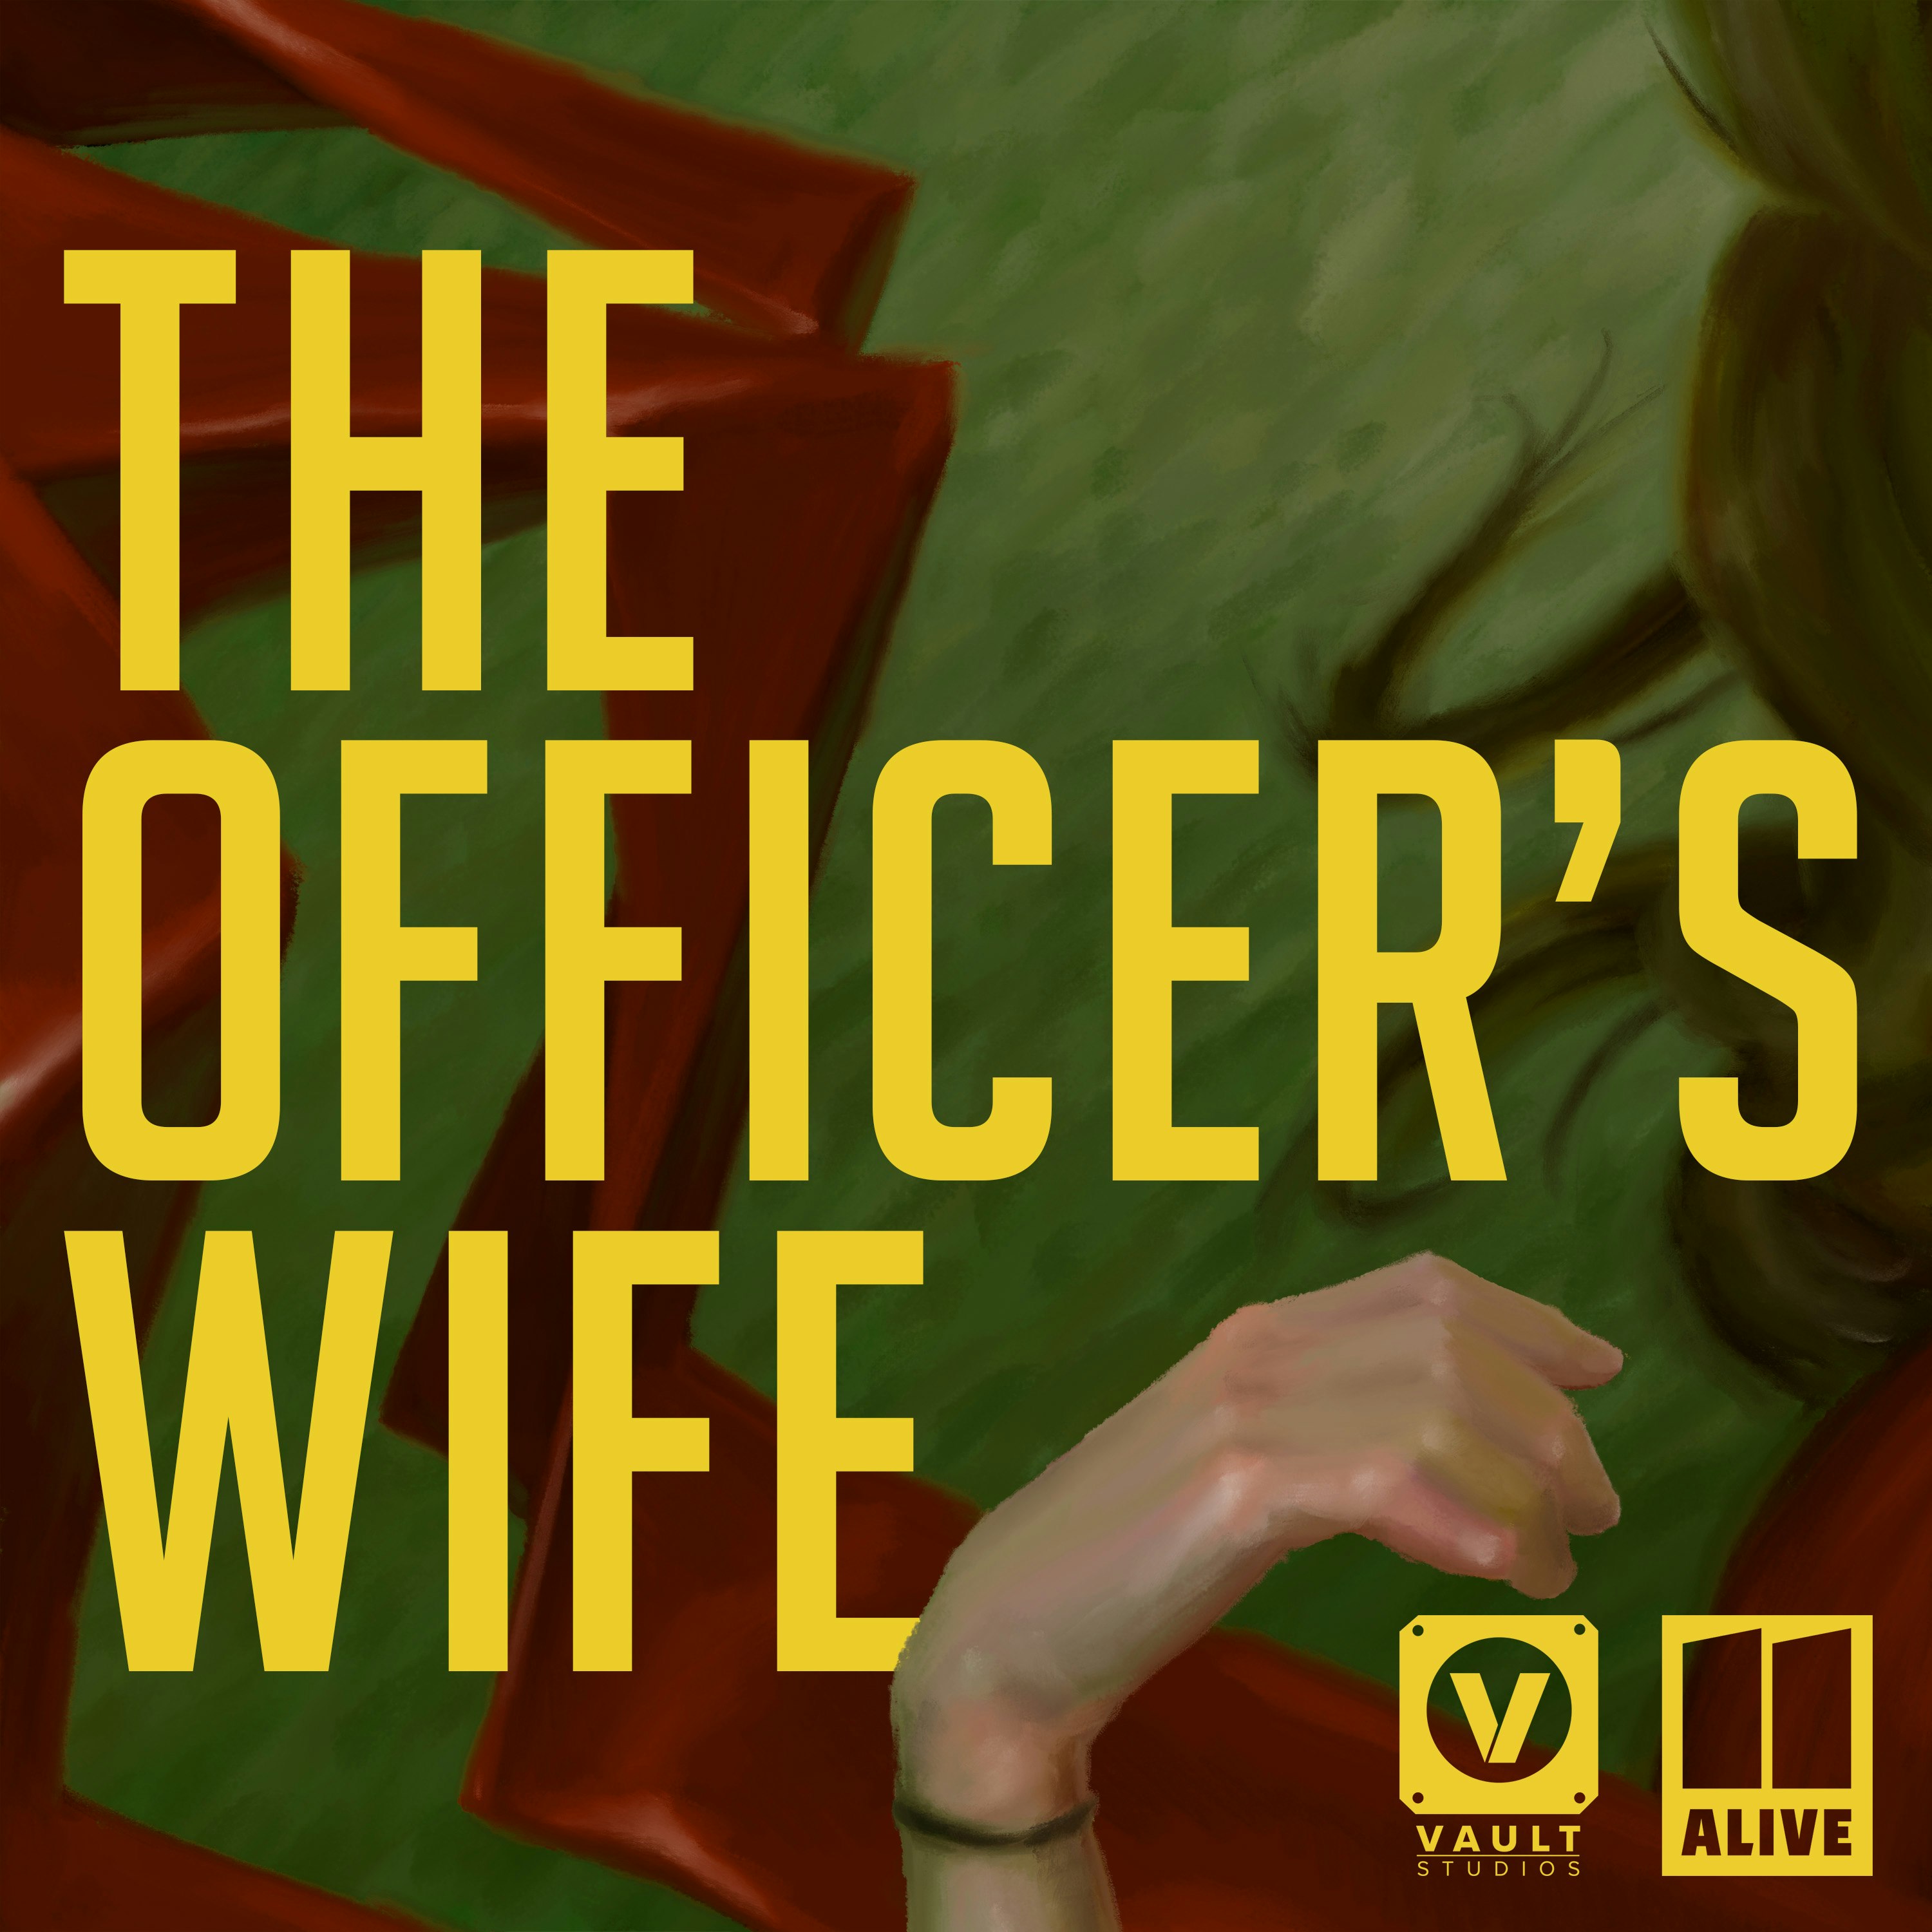 Trailer: Introducing The Officer’s Wife